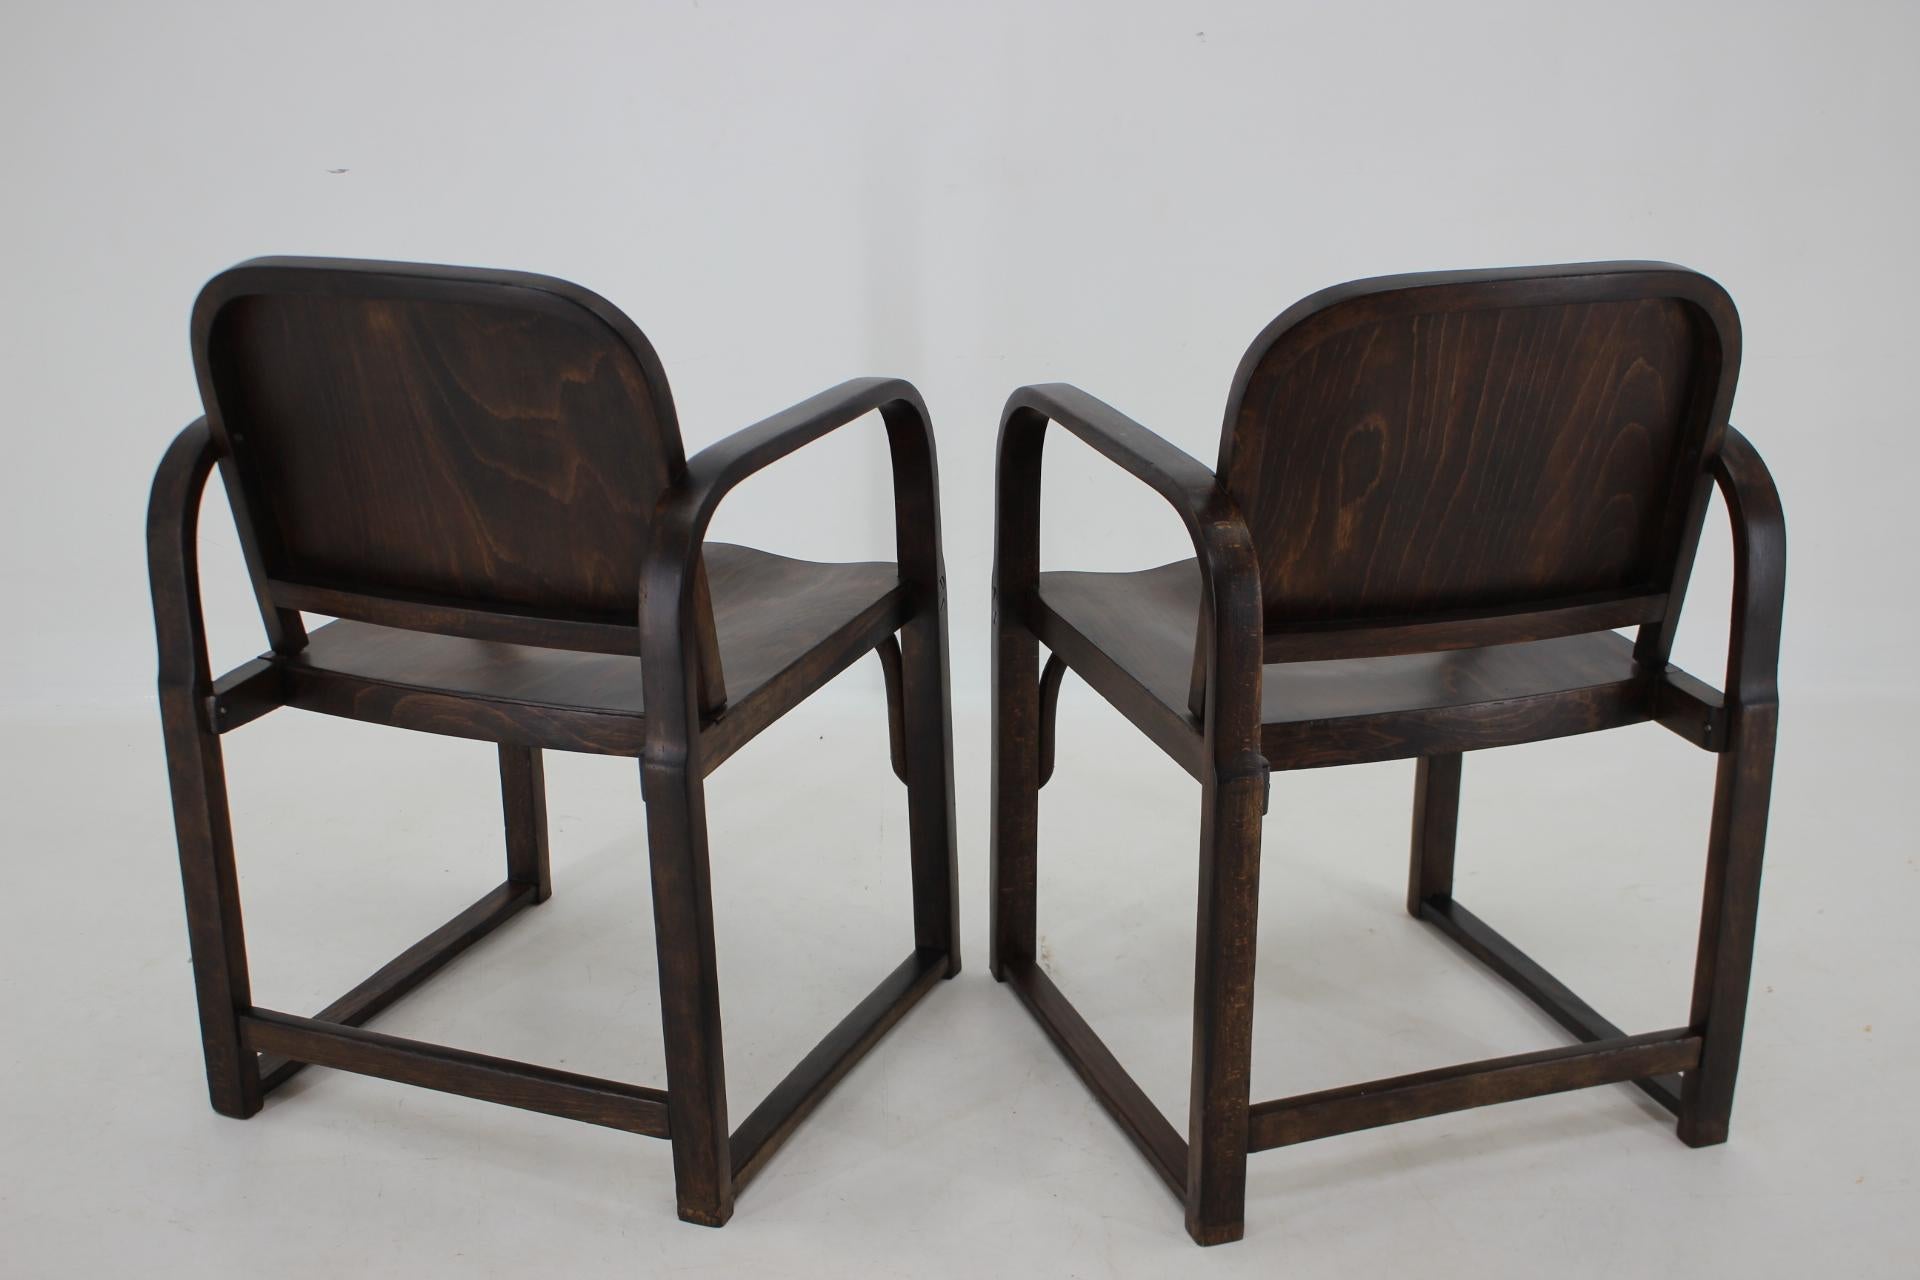 1930s Pair of Thonet Bentwood Armchairs A745 by Tatra, Czechoslovakia For Sale 2